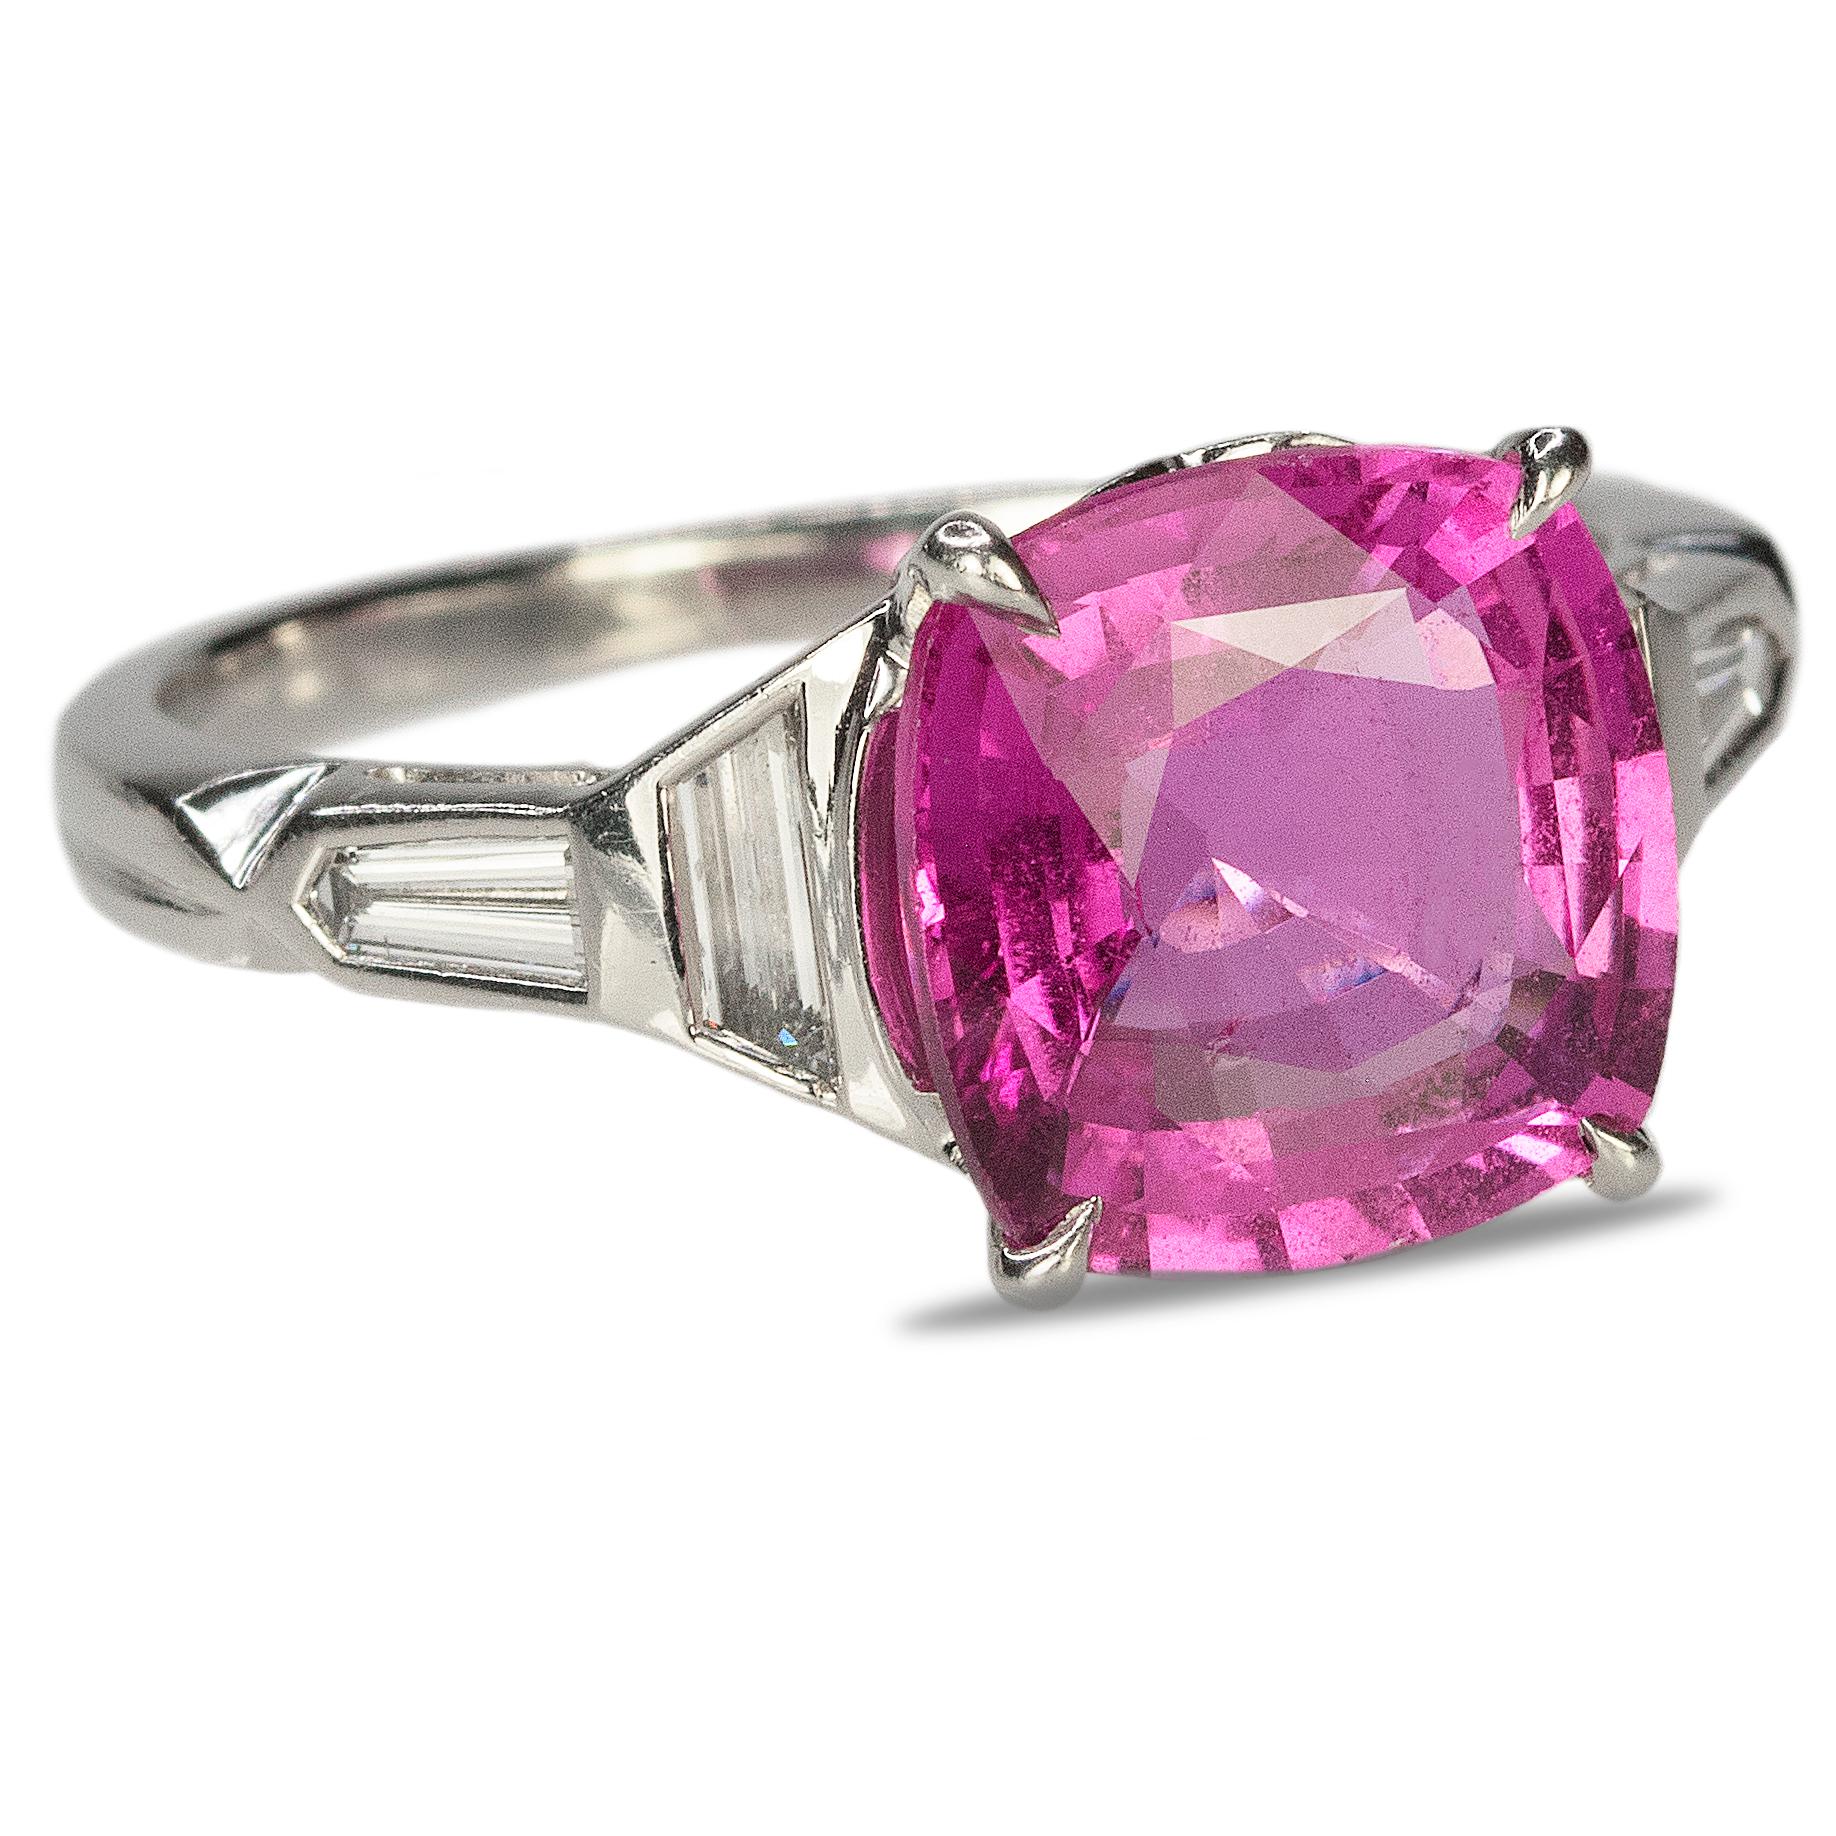 Platinum Art Deco ring with AGL certified 4.55 carat pink sapphire and 2 shield and two bullet cut diamonds weighing approximately 0.60 carats. 